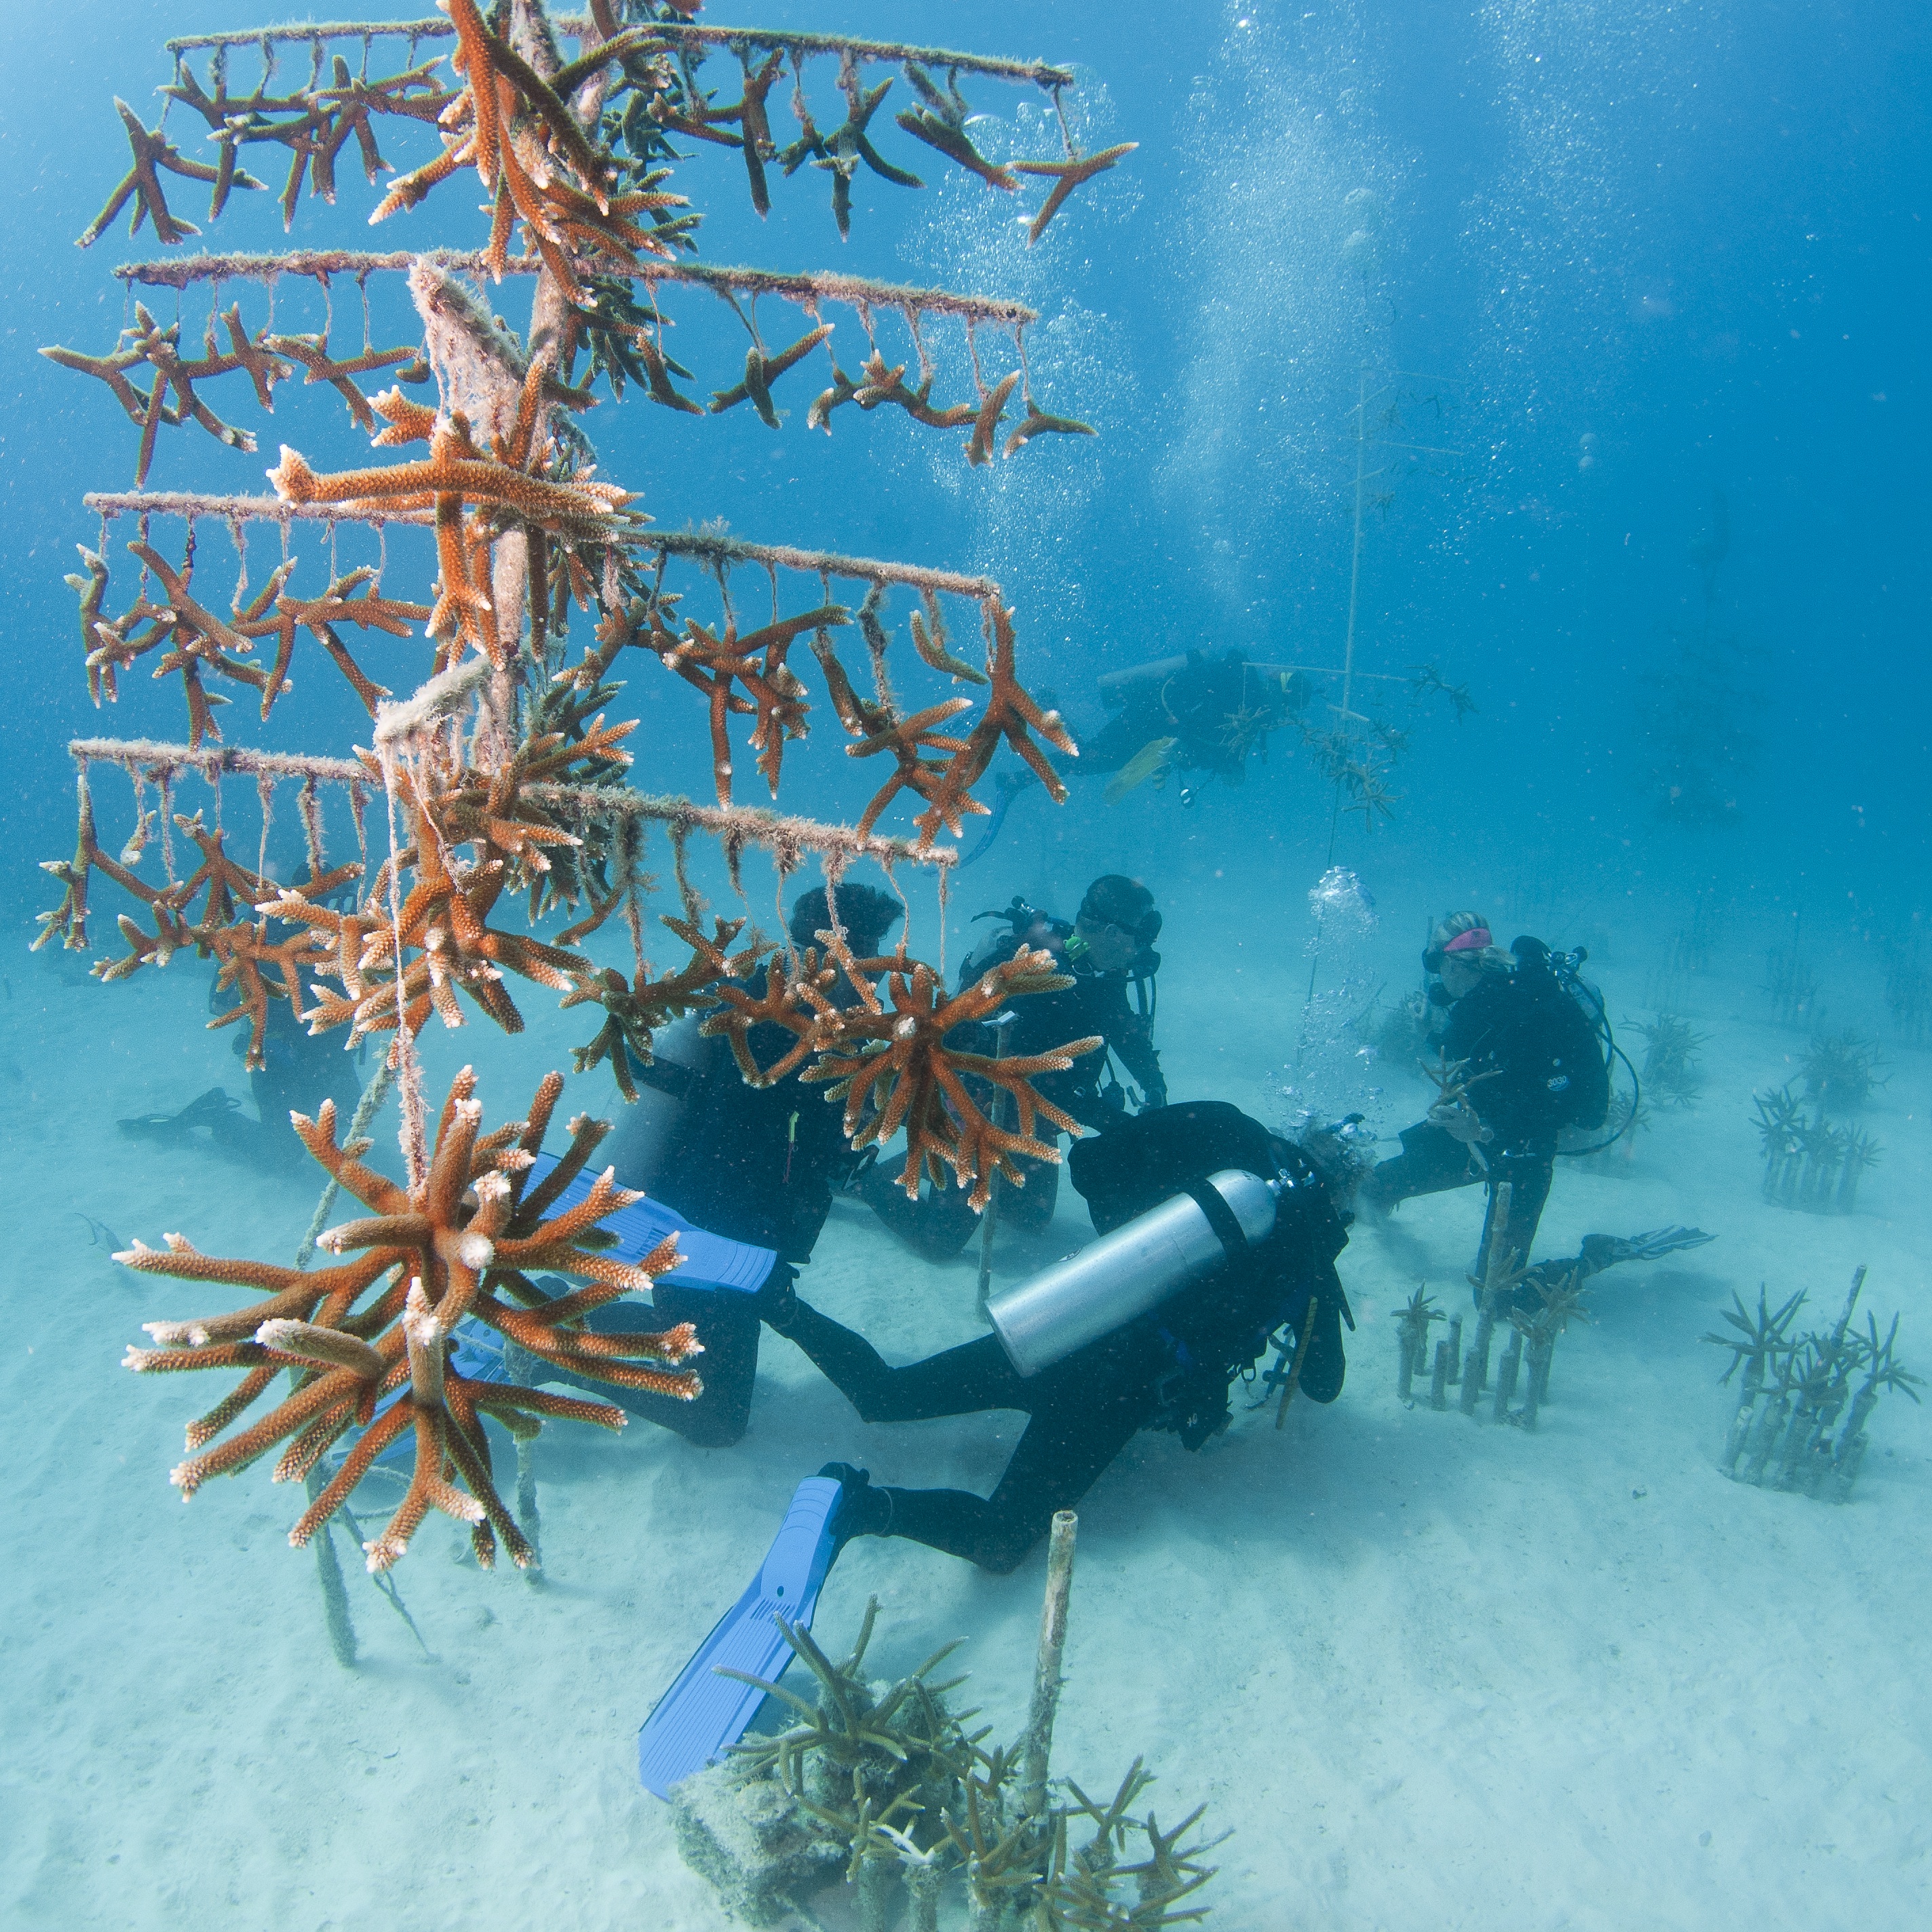 Divers learn about environmental impacts on Keys reefs through education, and participate in hands-on restoration dives.